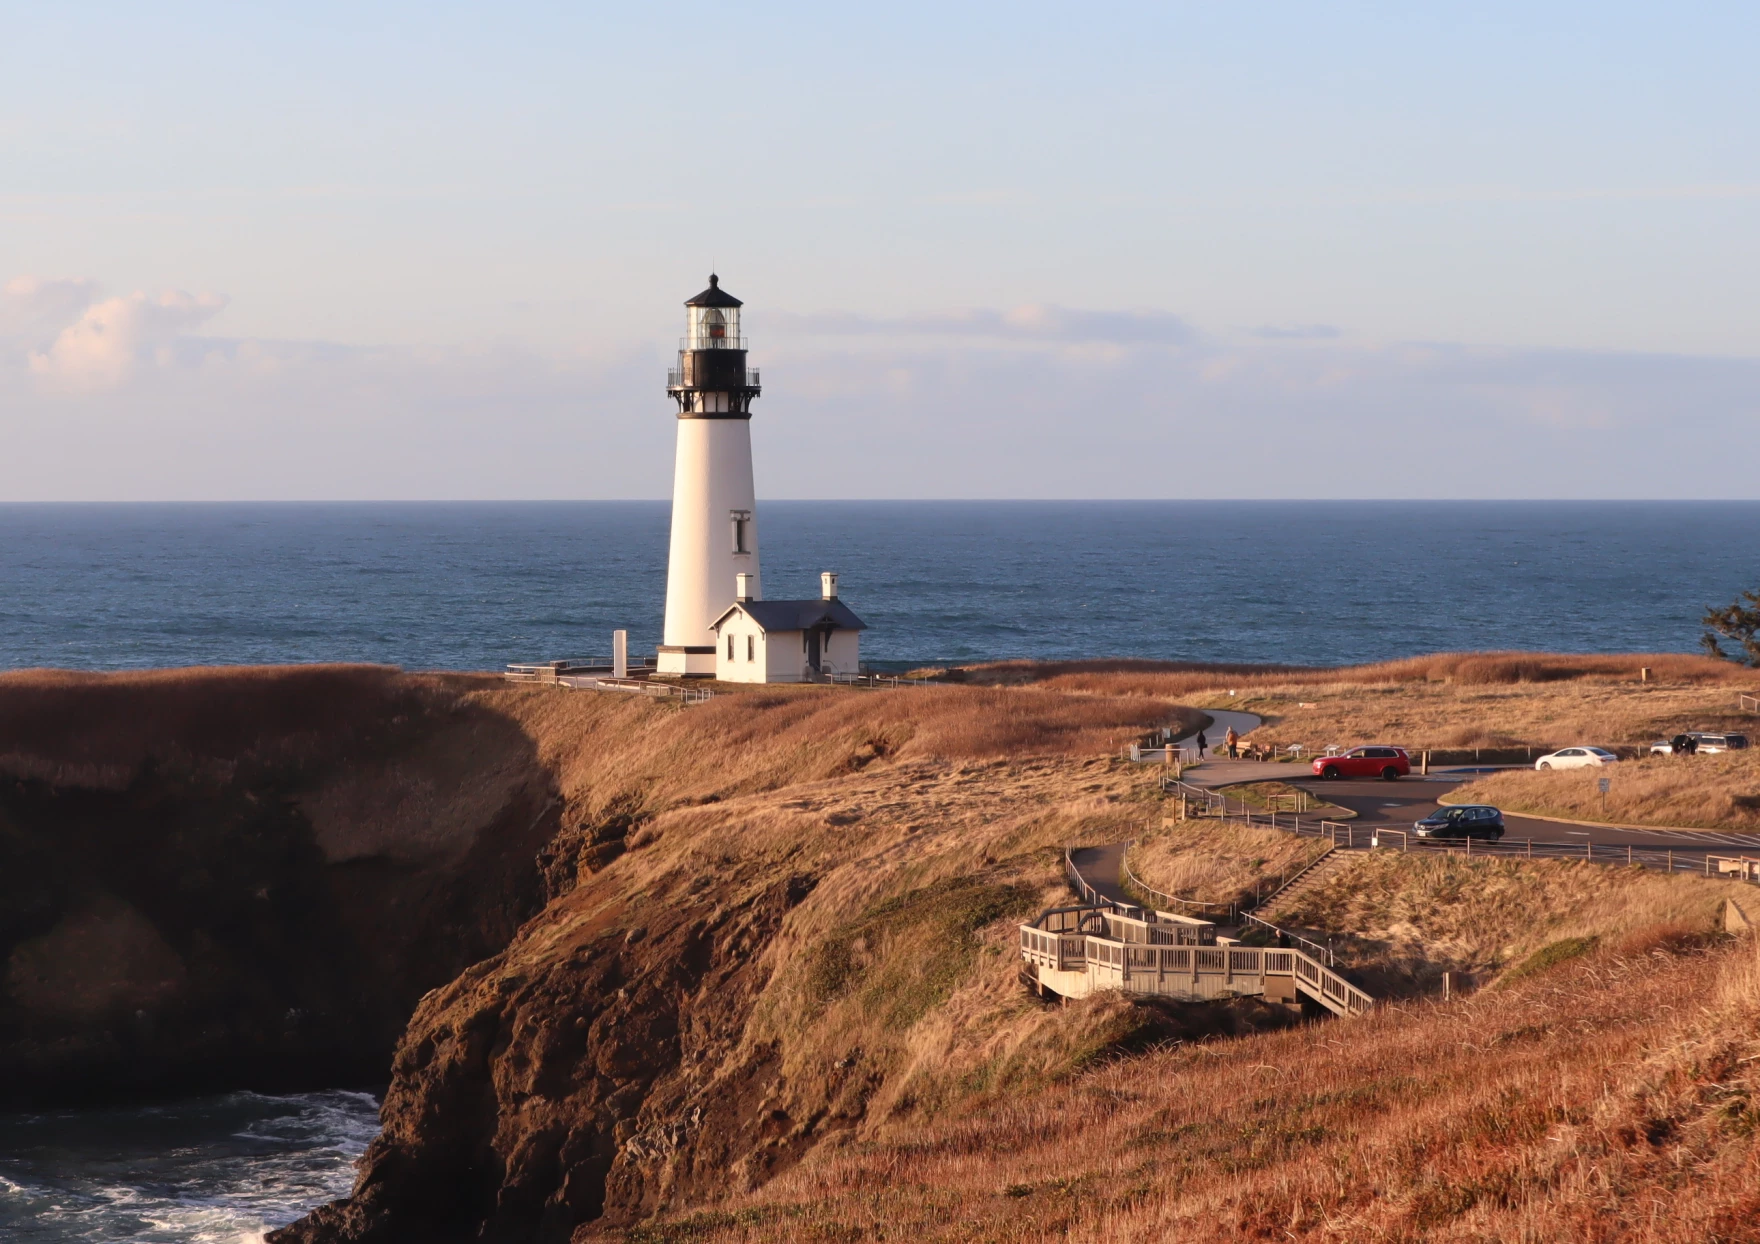 The Yaquina Head Lighthouse celebrates its 150th birthday in 2023